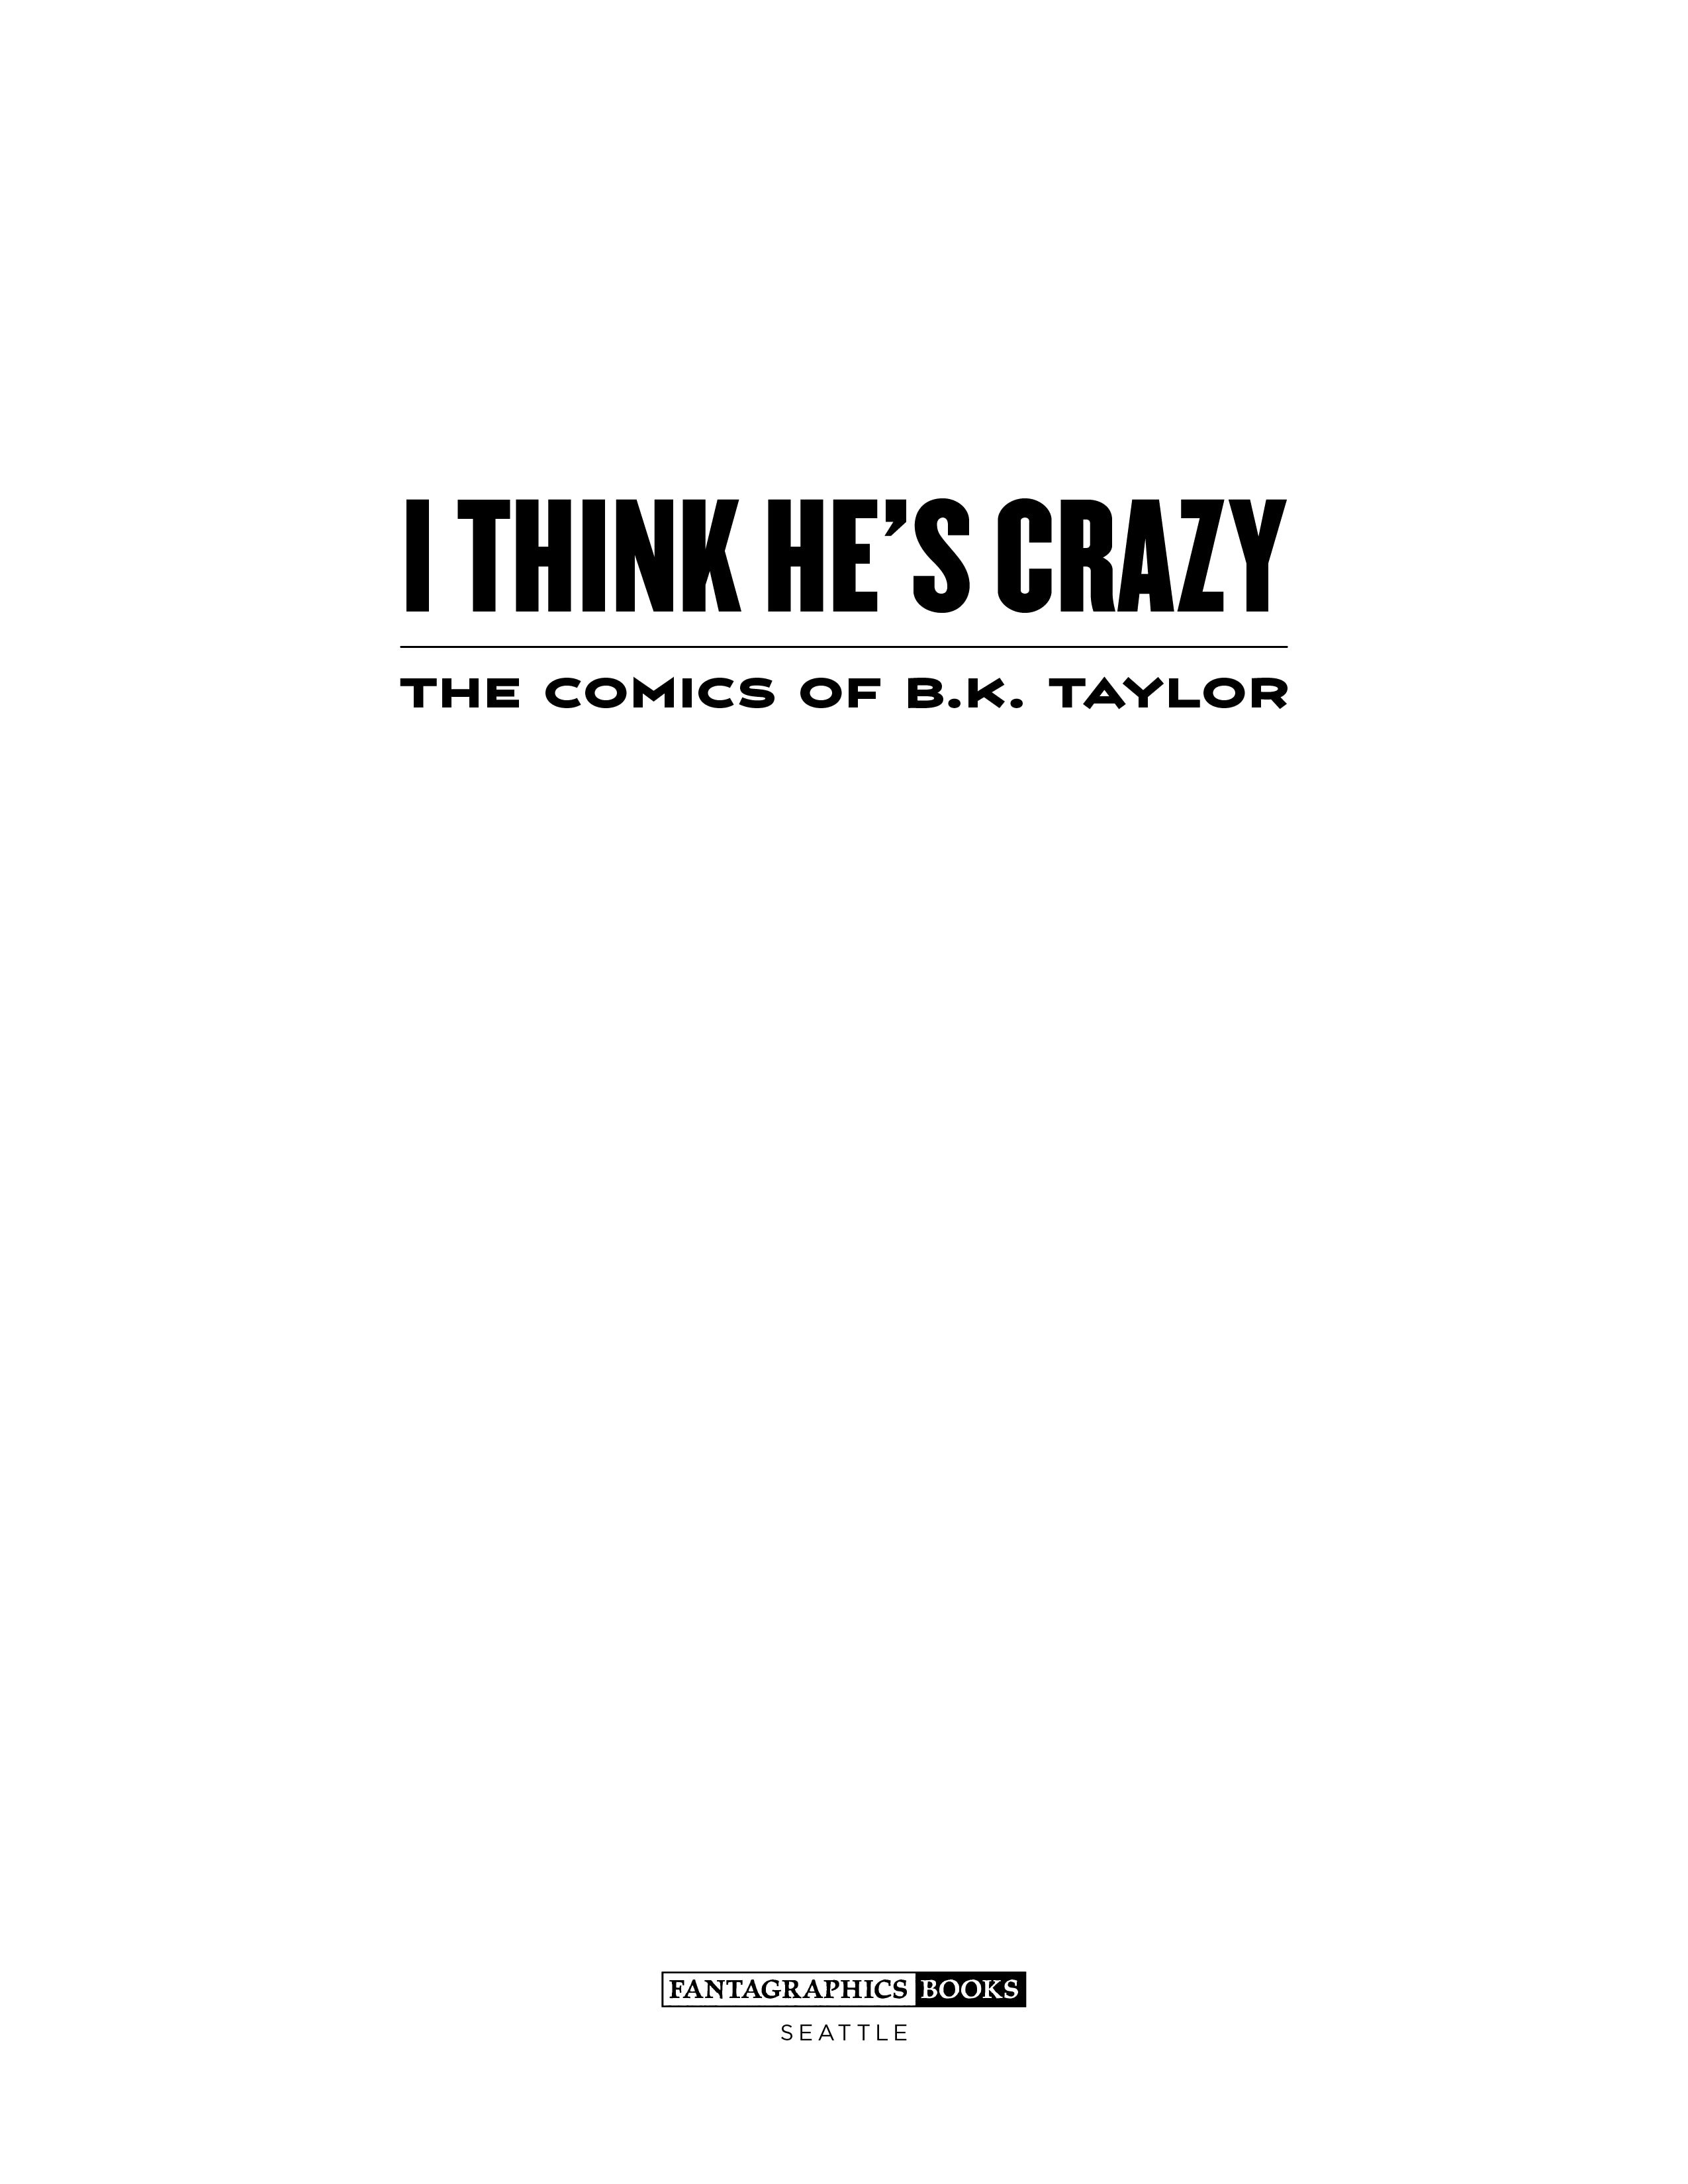 Read online I Think He's Crazy! comic -  Issue # TPB - 2